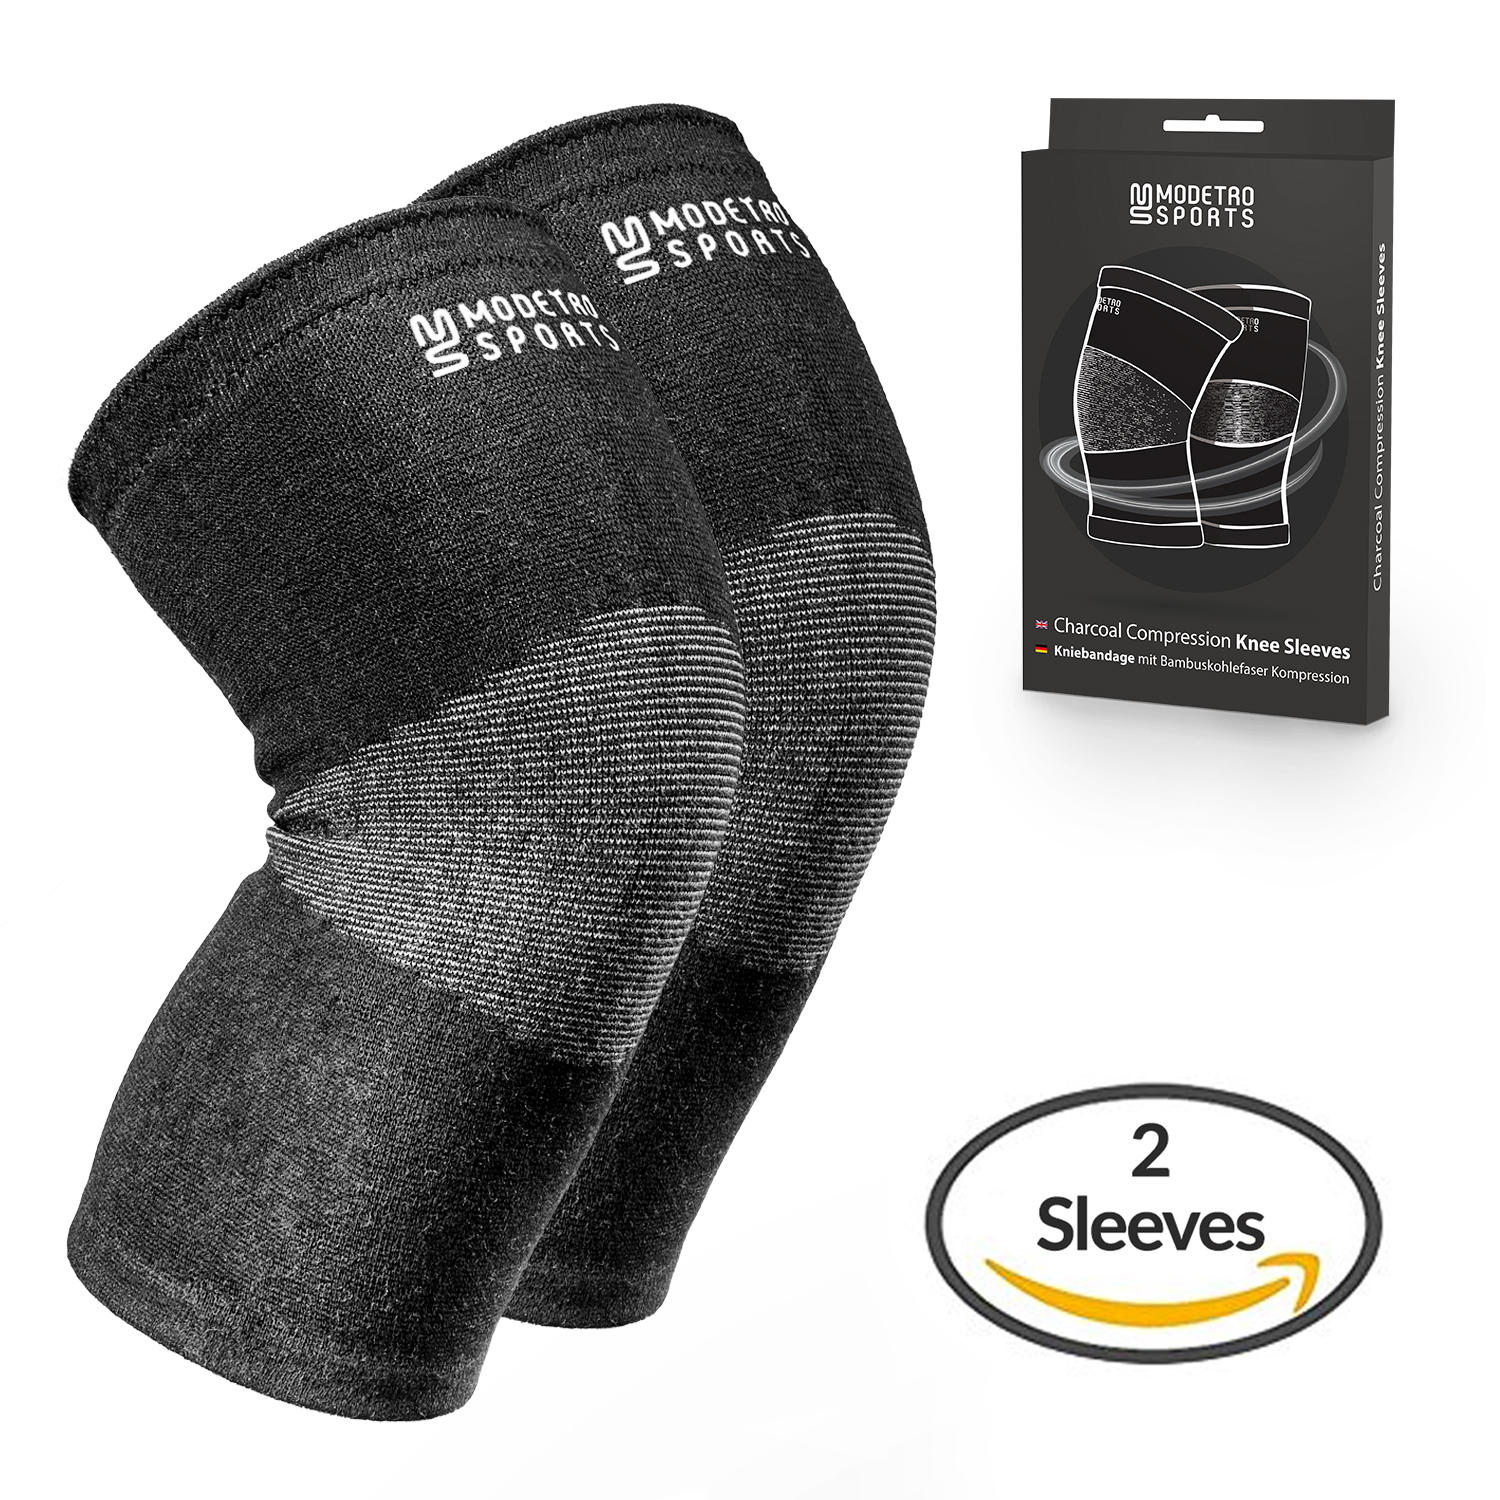 Arthritis Meniscus Tear Running Cycling Single ACL Camari Gear Sports Knee Compression Sleeve Support Brace Basketball Tendonitis Weightlifting - for Joint Pain MCL Squats Injury Recovery 